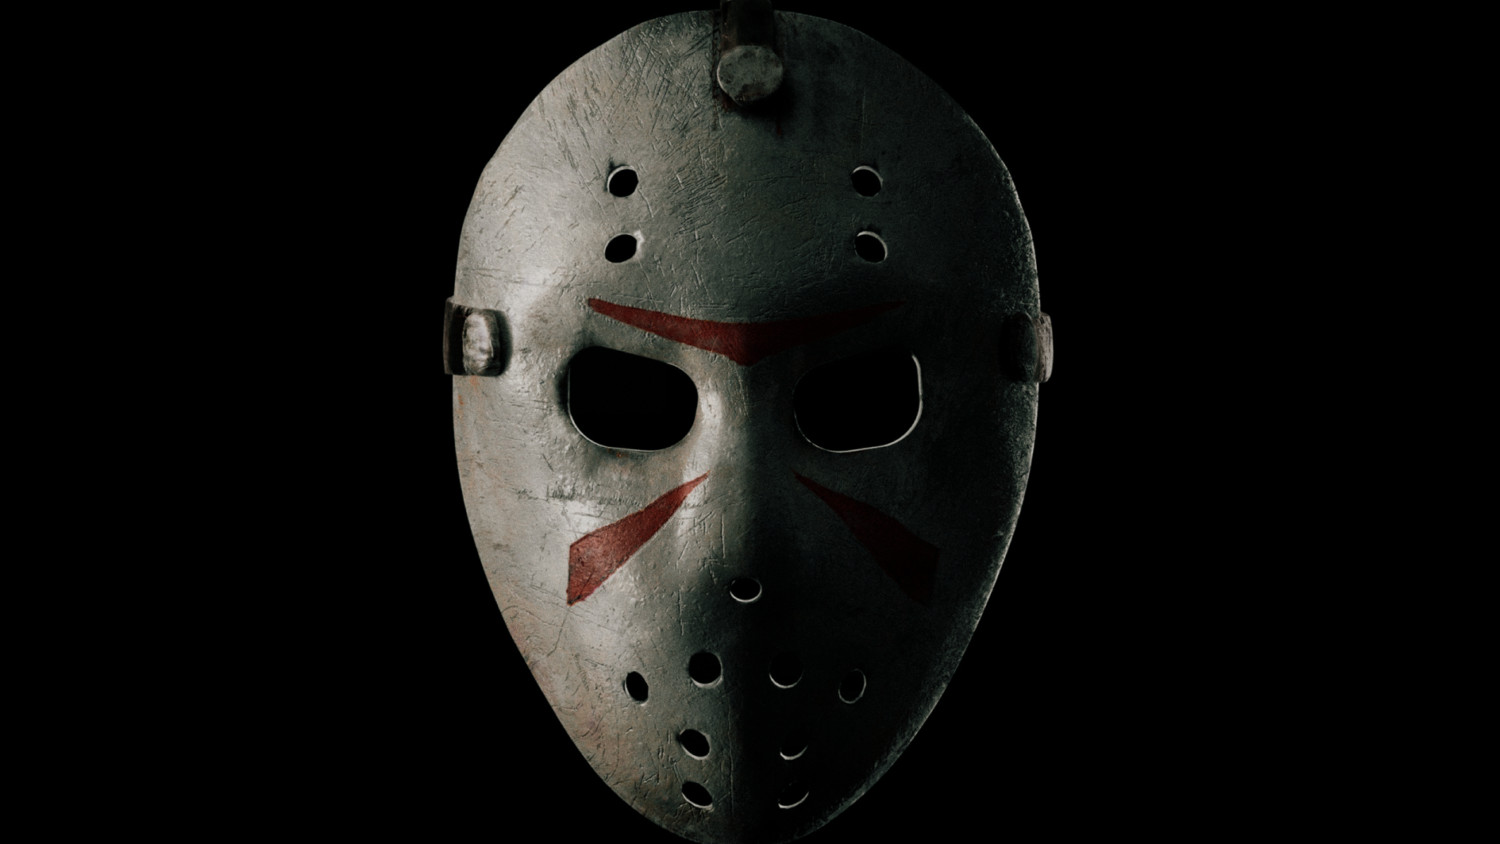 Jason Universe Announced: Friday the 13th, Crystal Lake, More